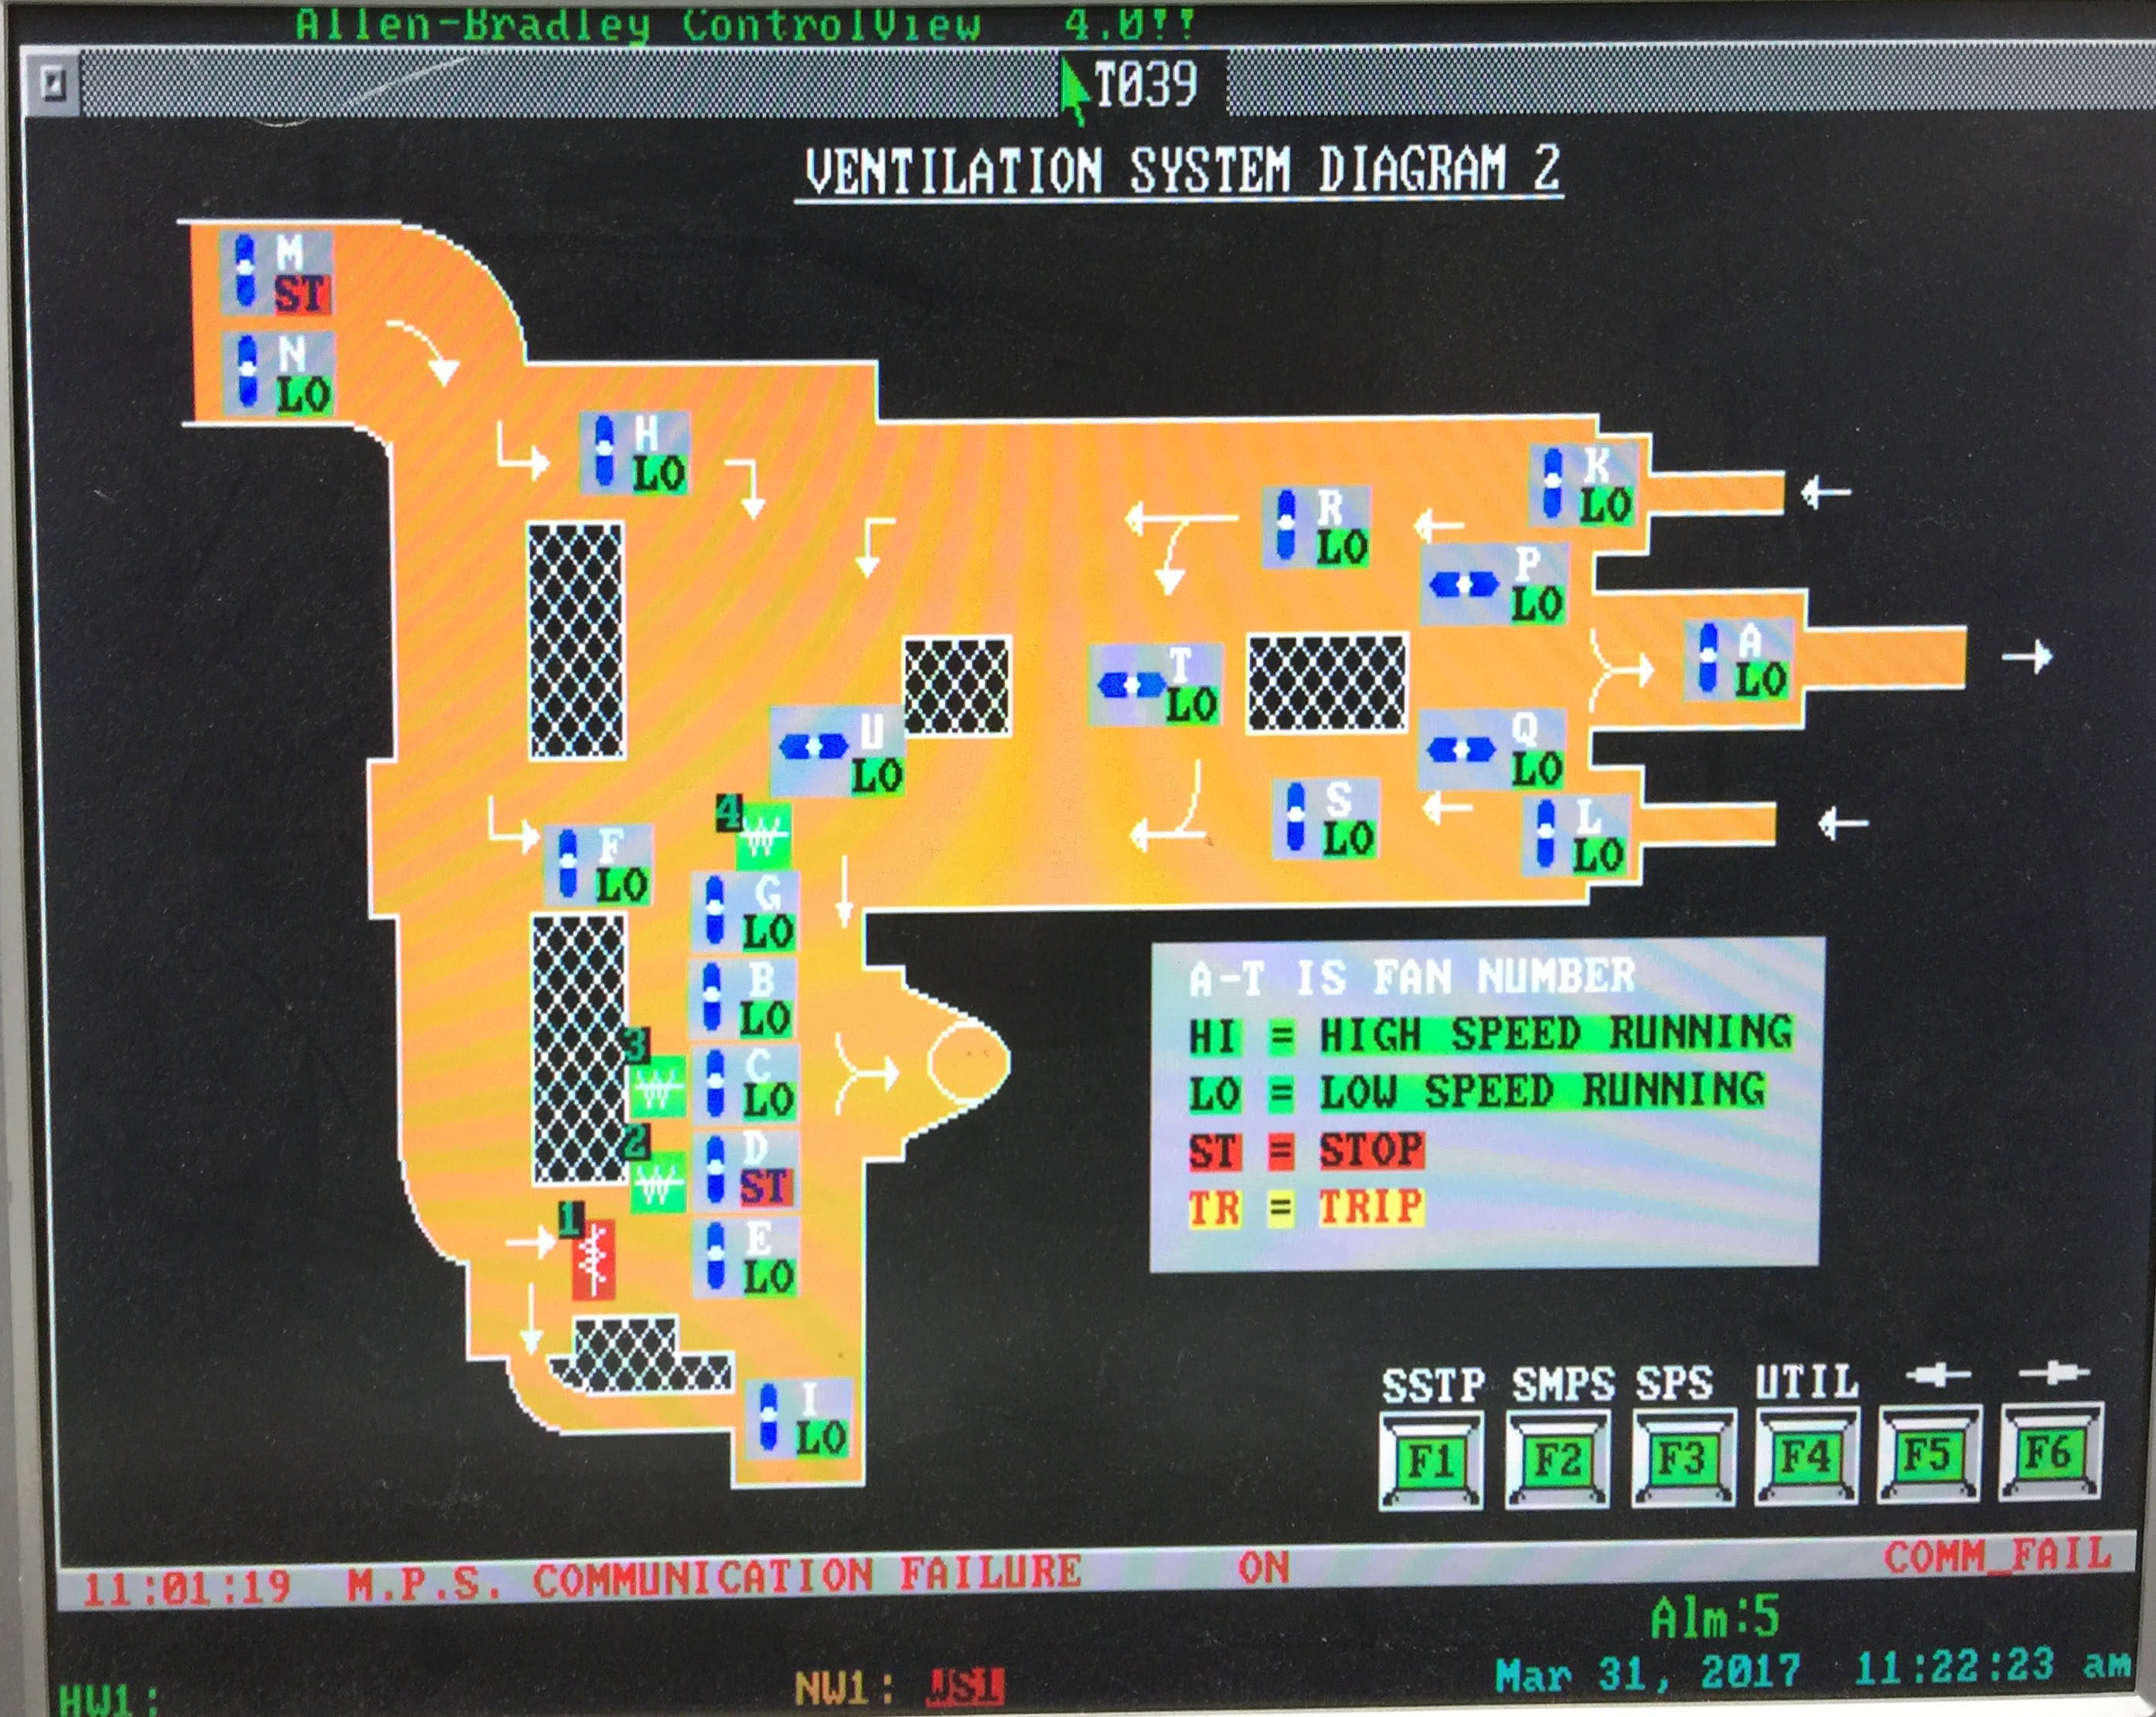 Part of Ventilation System screenshot from ControlView Before Works in DSD Stanley STW (Typical)